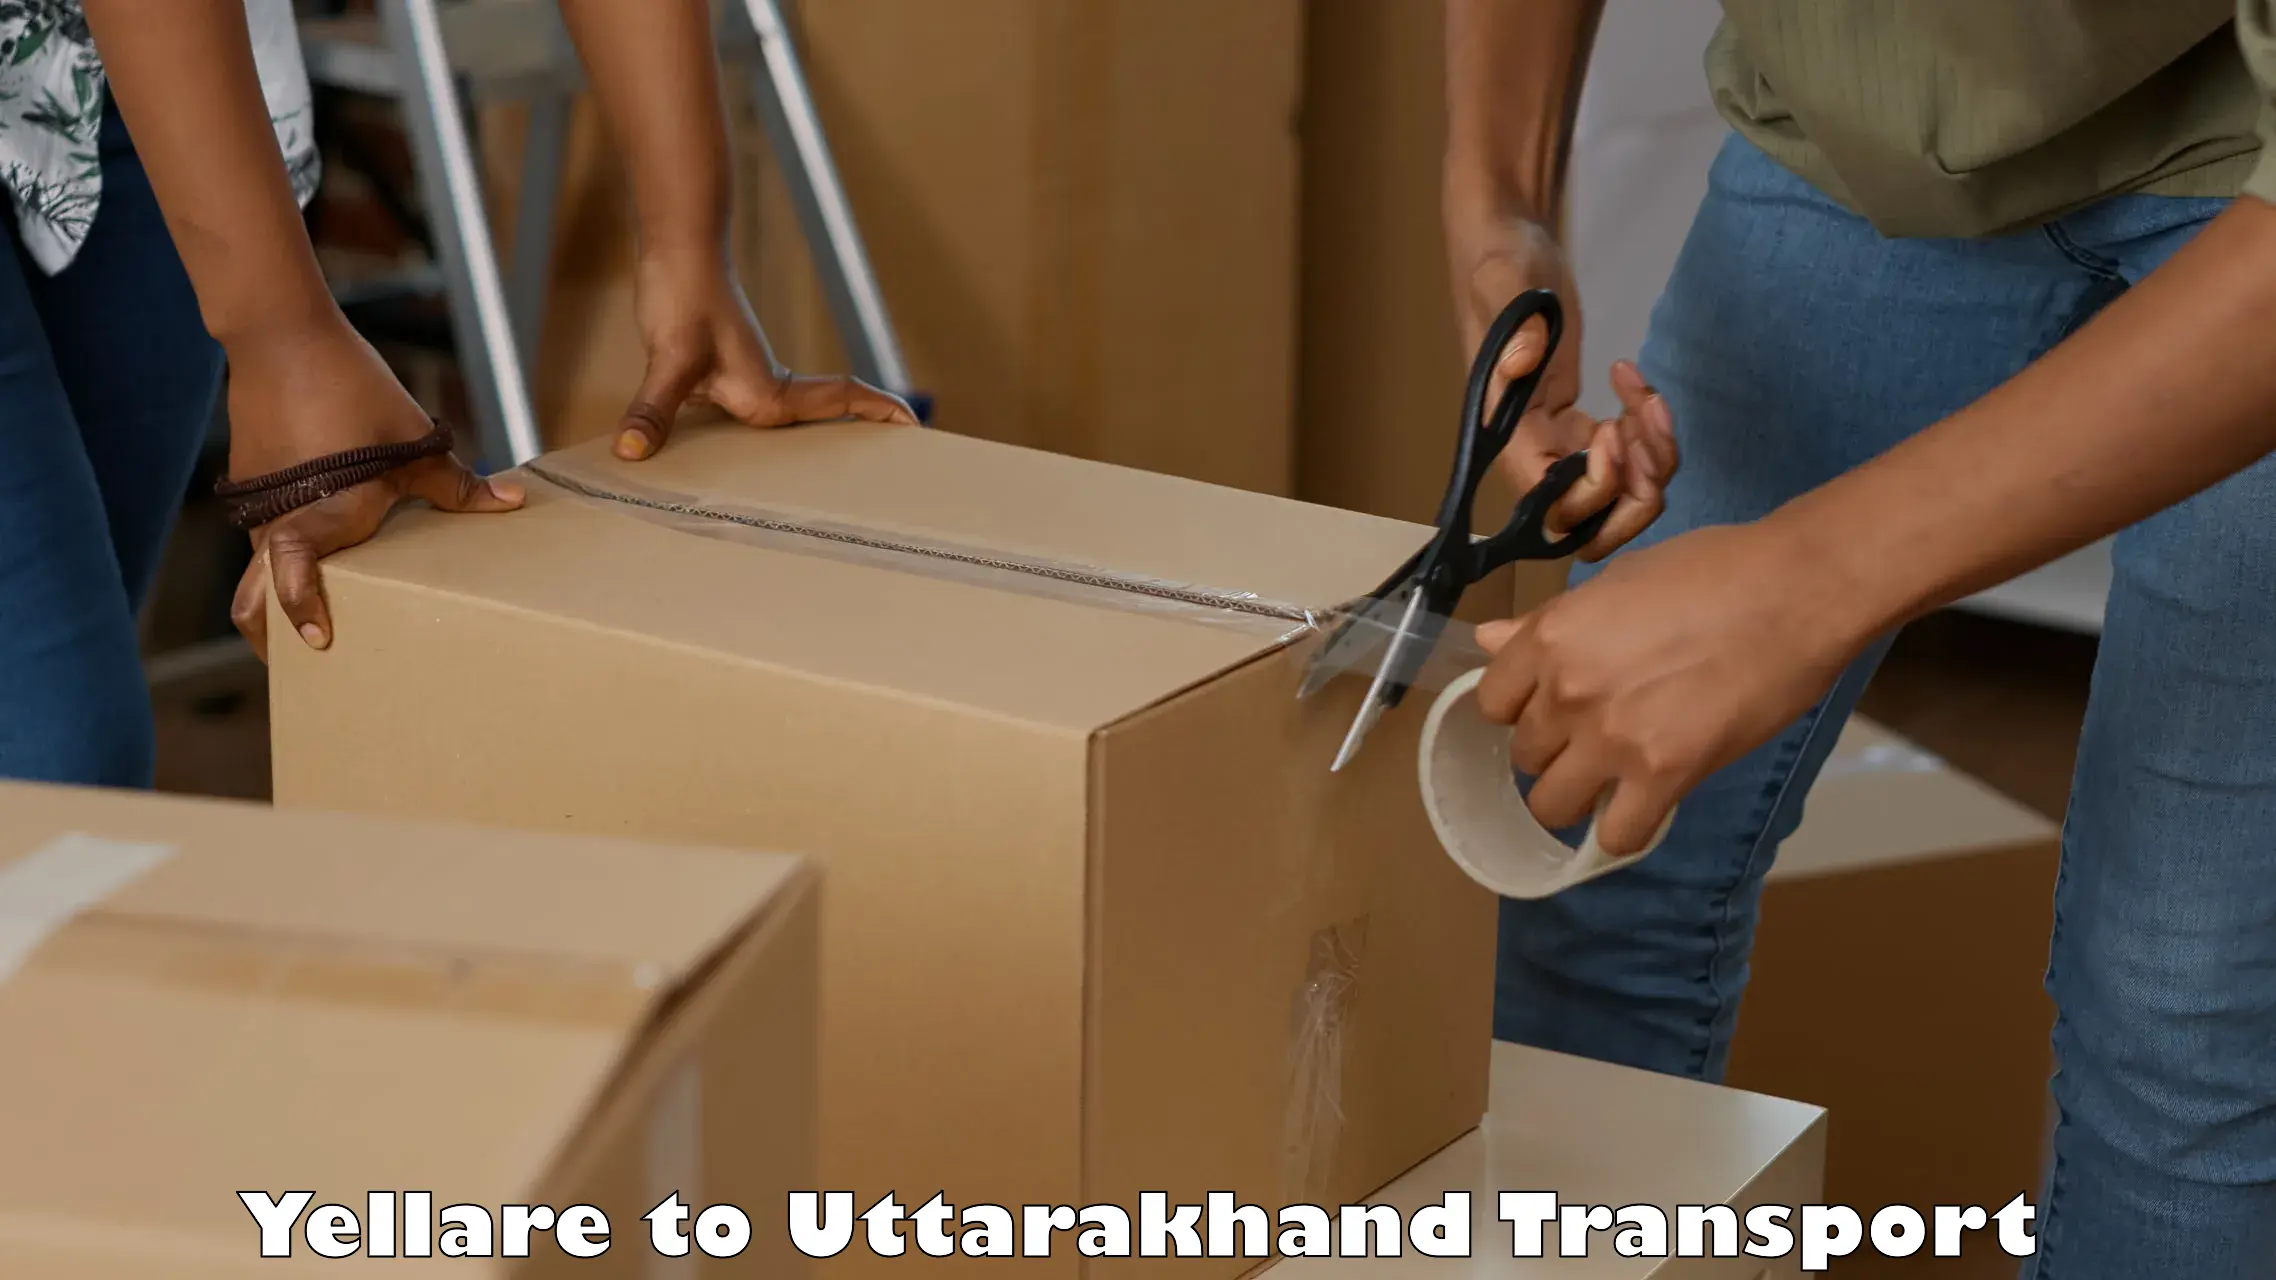 Container transport service Yellare to Tanakpur